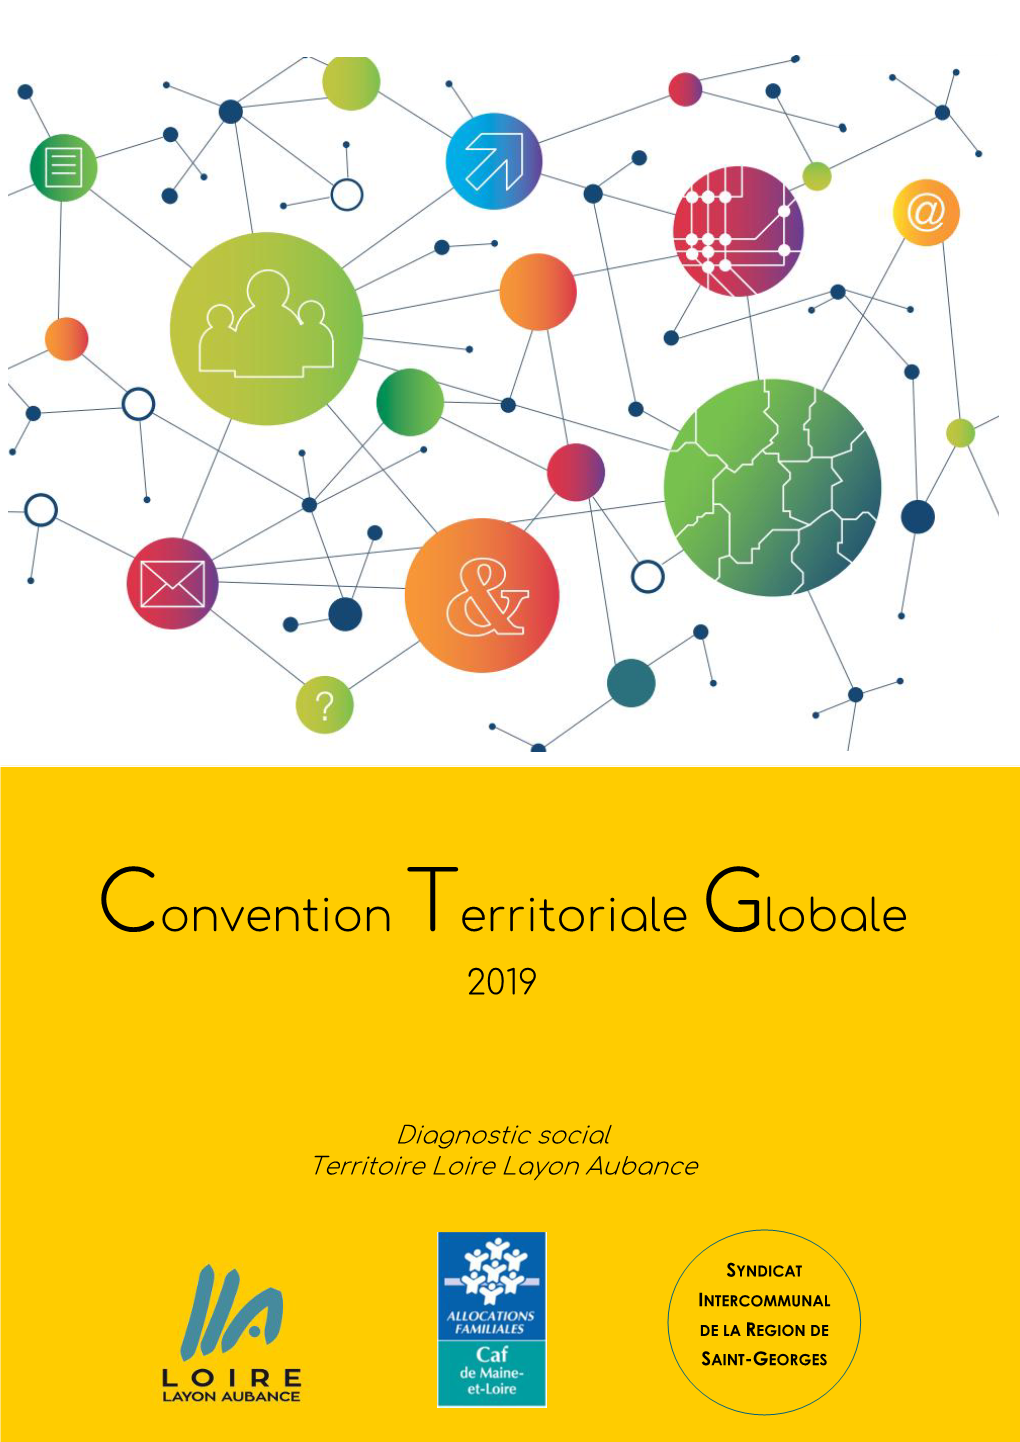 Convention Territoriale Globale 2019